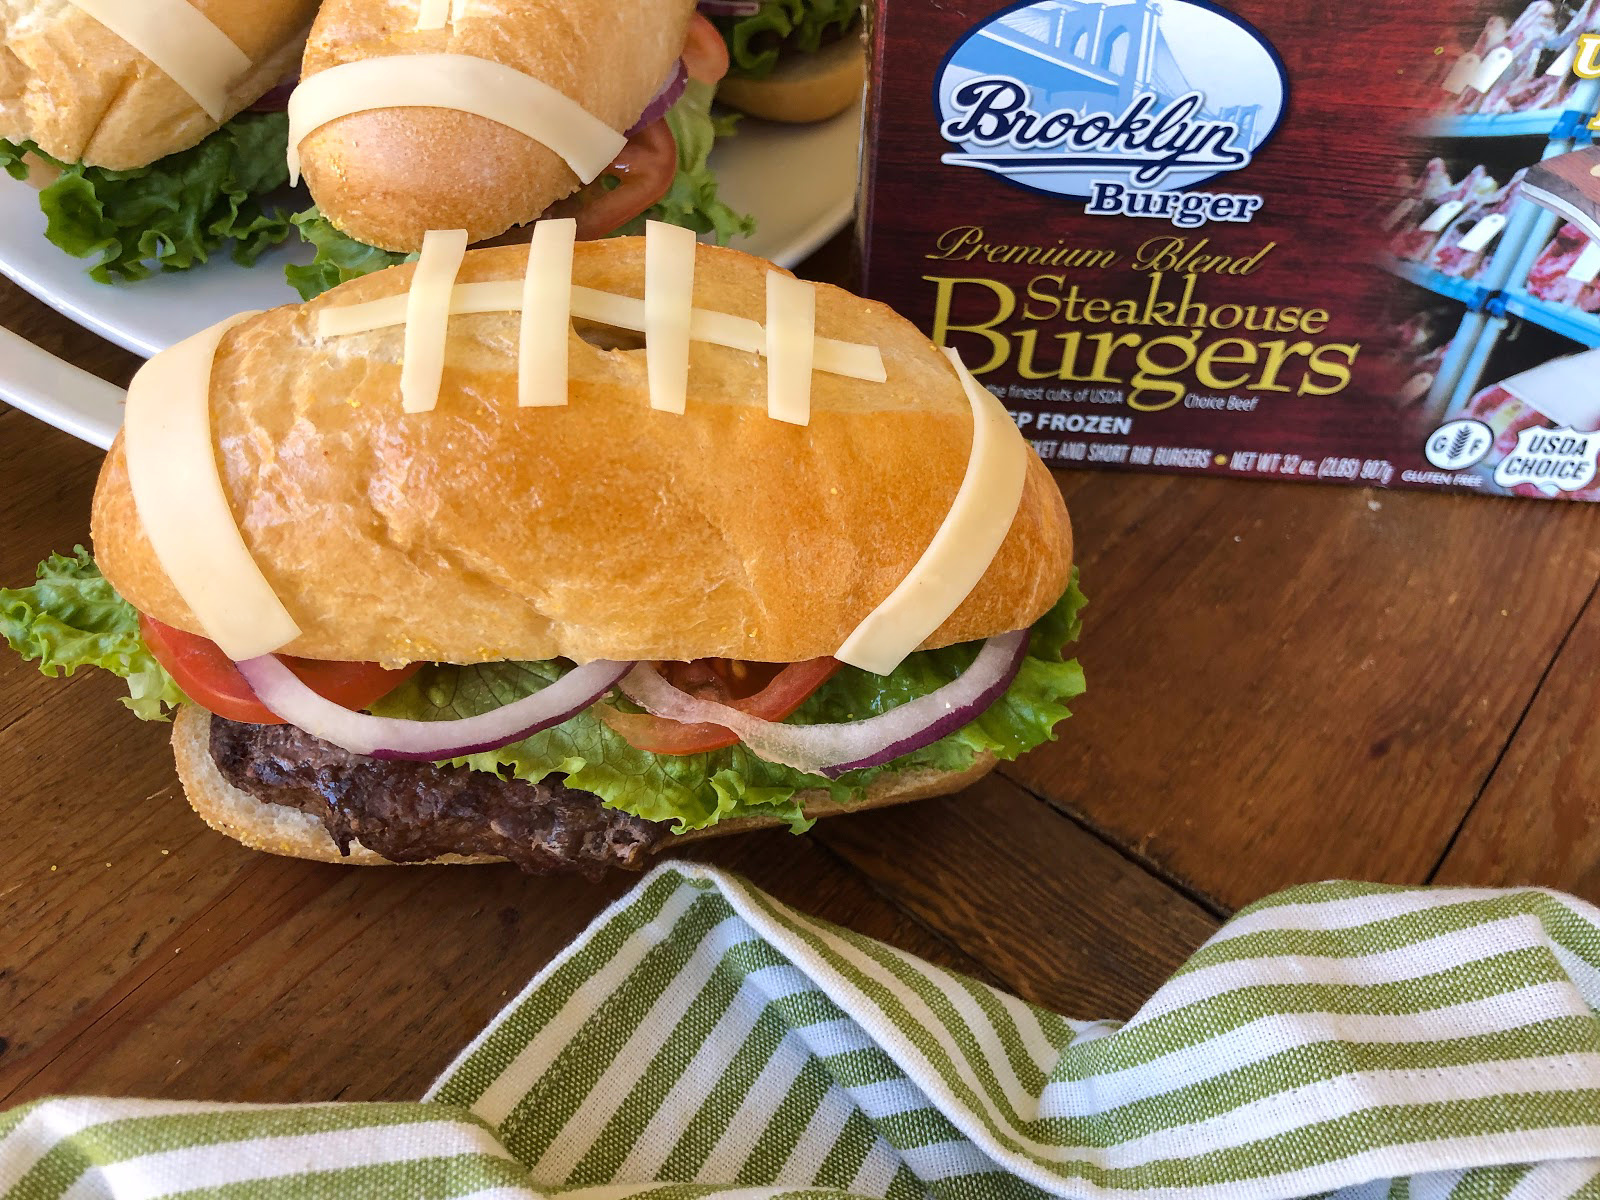 Get Ready For The Big Game With A Great Deal On Brooklyn Burger Steakhouse Burgers - Two Pound Boxes Just $9.99 This Week At Publix on I Heart Publix